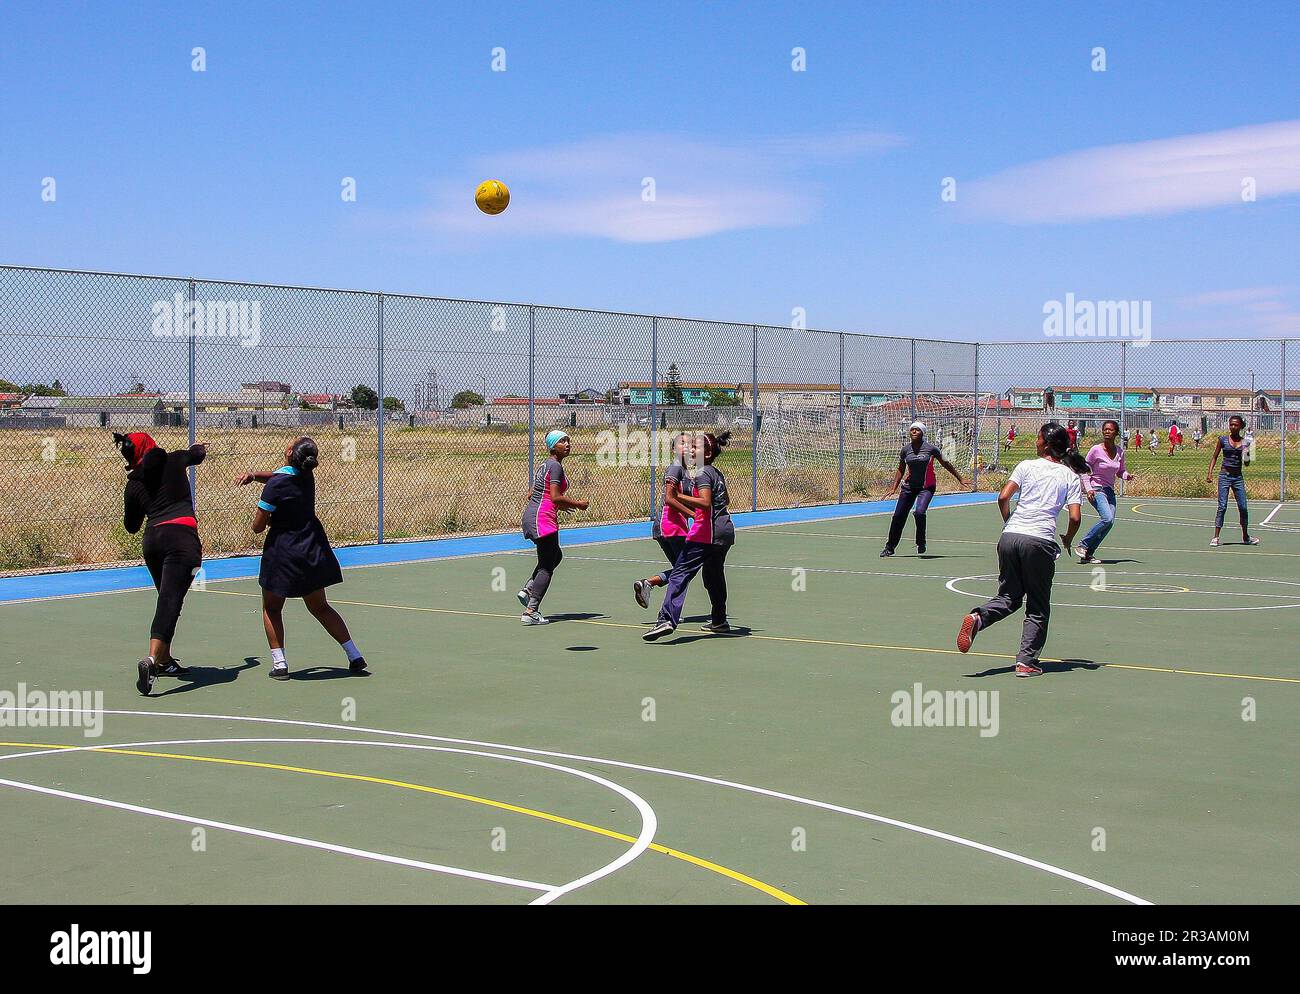 Diverse children playing Netball at school Stock Photo